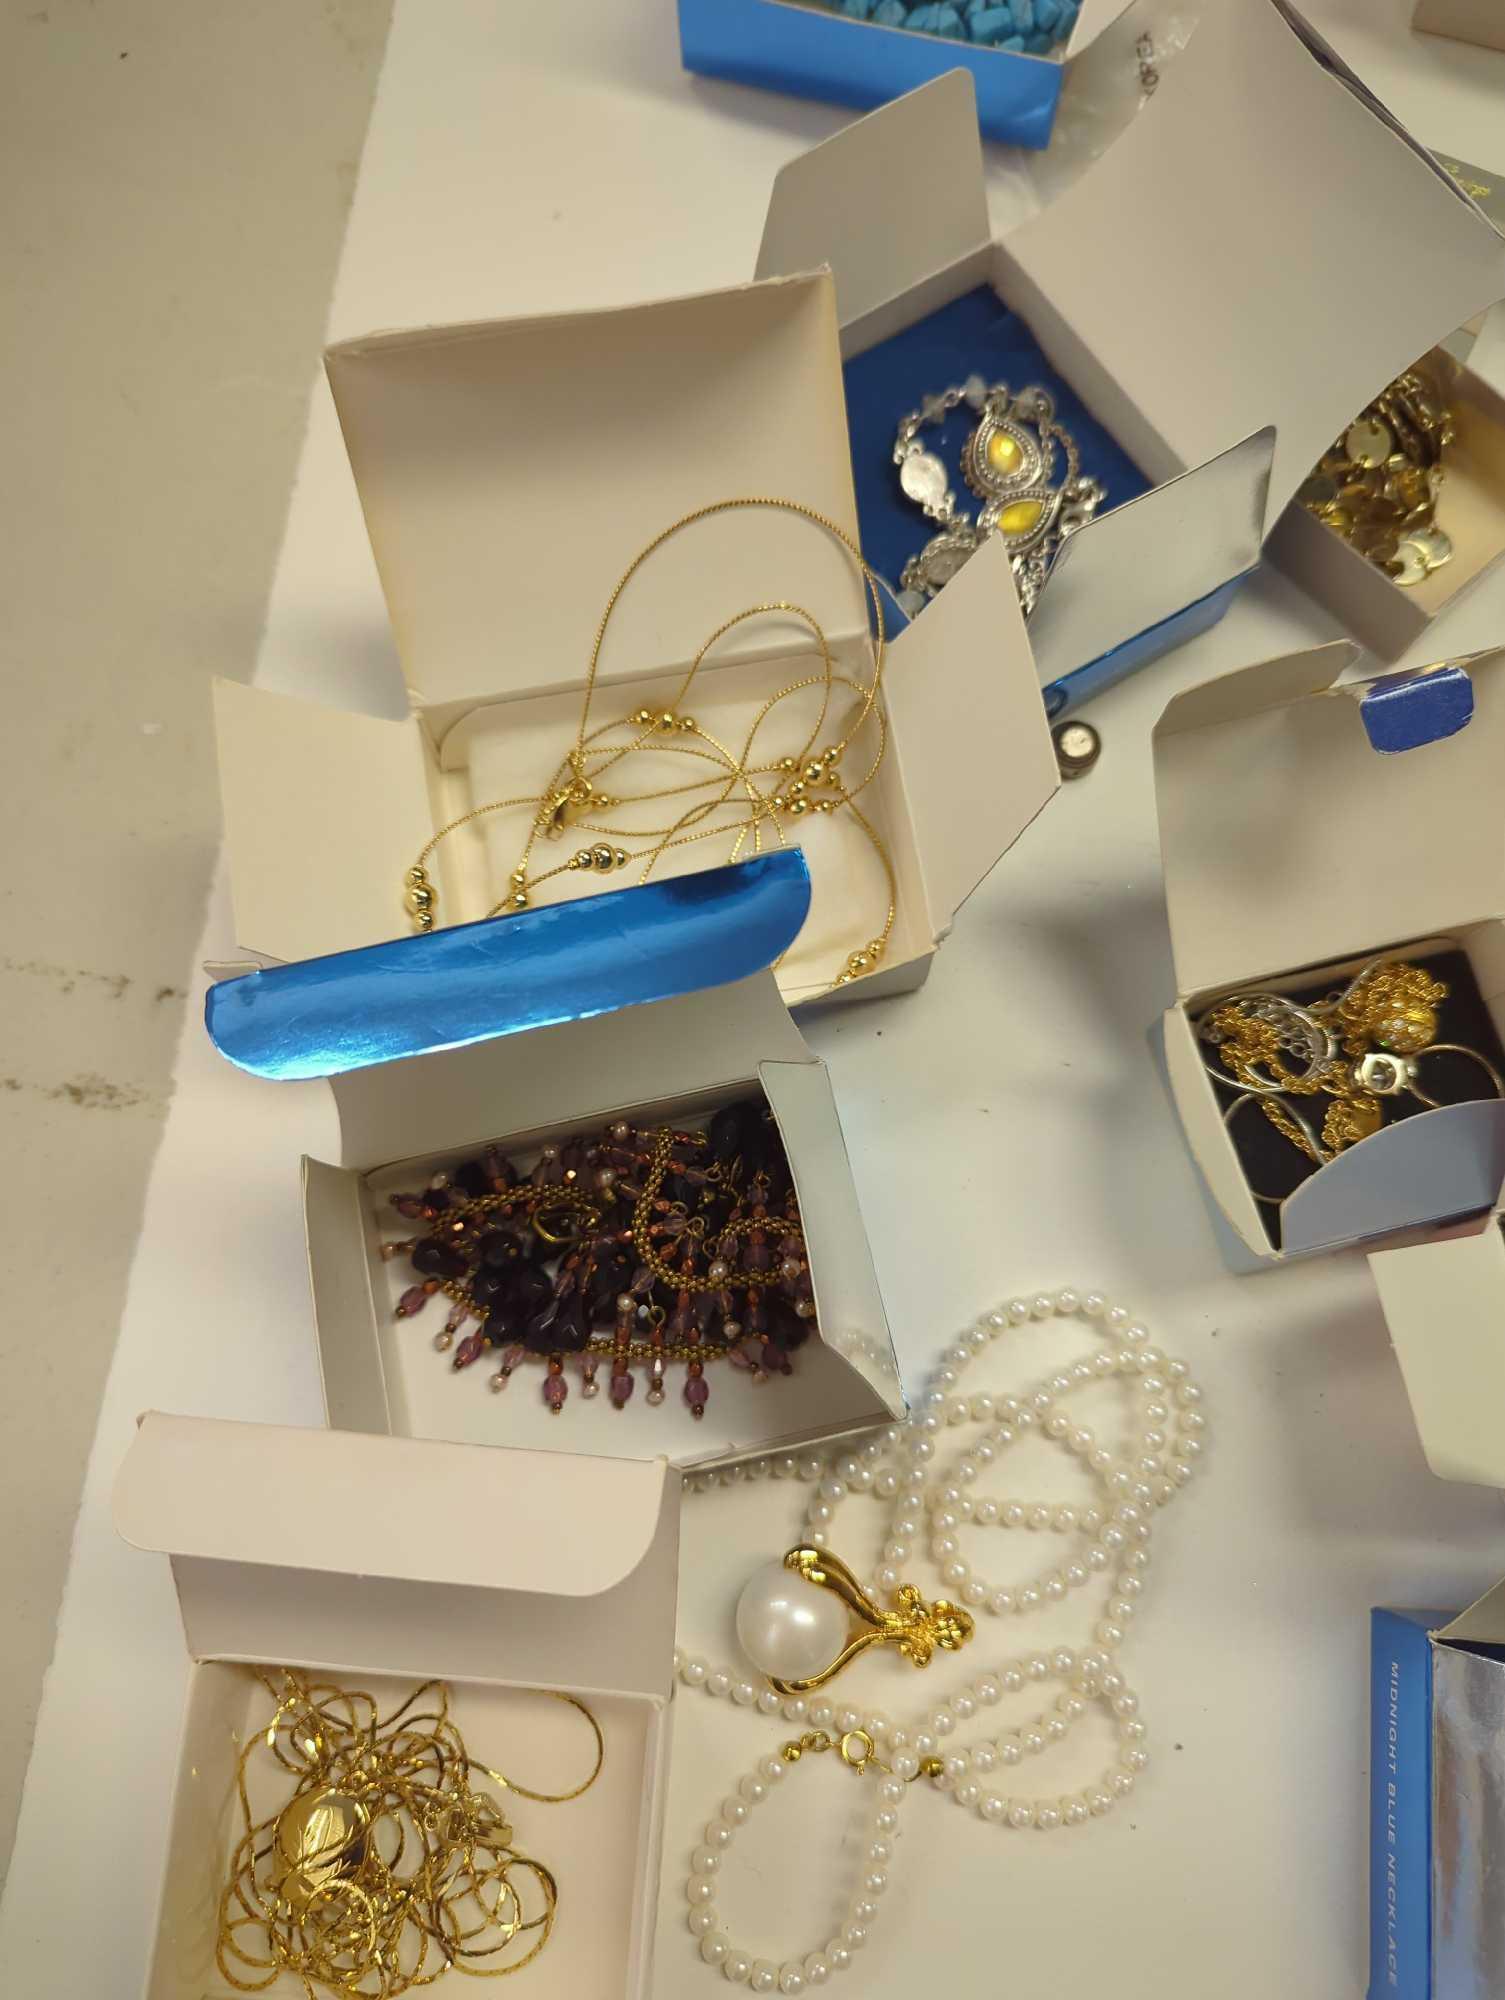 Discover a world of mystery and enchantment with our unsorted, unresearched costume jewelry